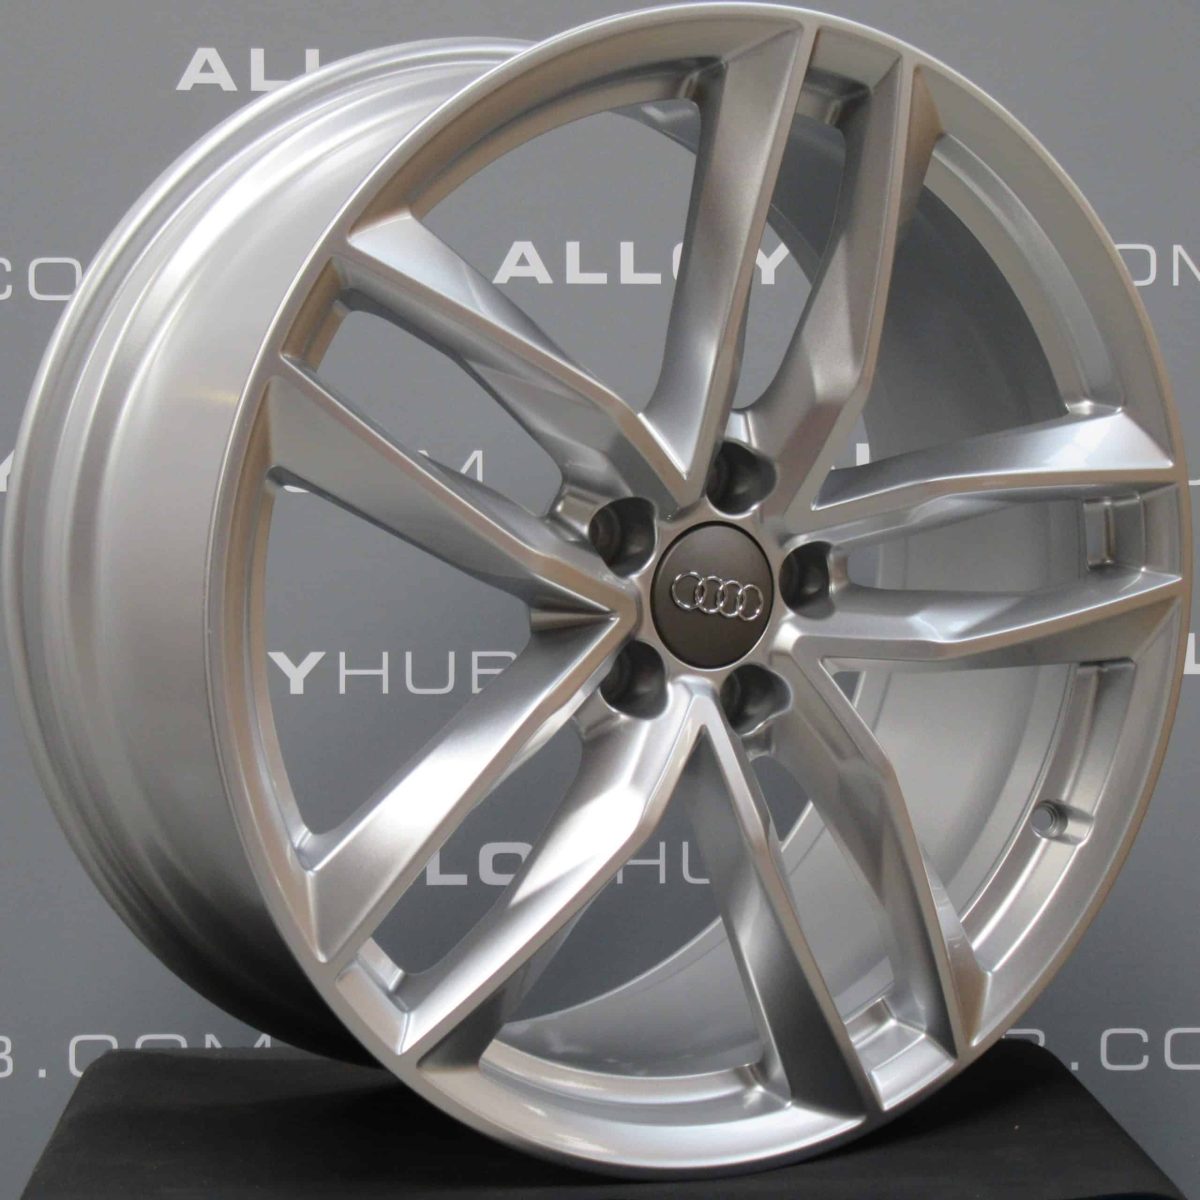 Genuine Audi A6 RS6 5 Twin Spoke 20" Inch Alloy Wheels with Silver Finish 4G9 601 025 M